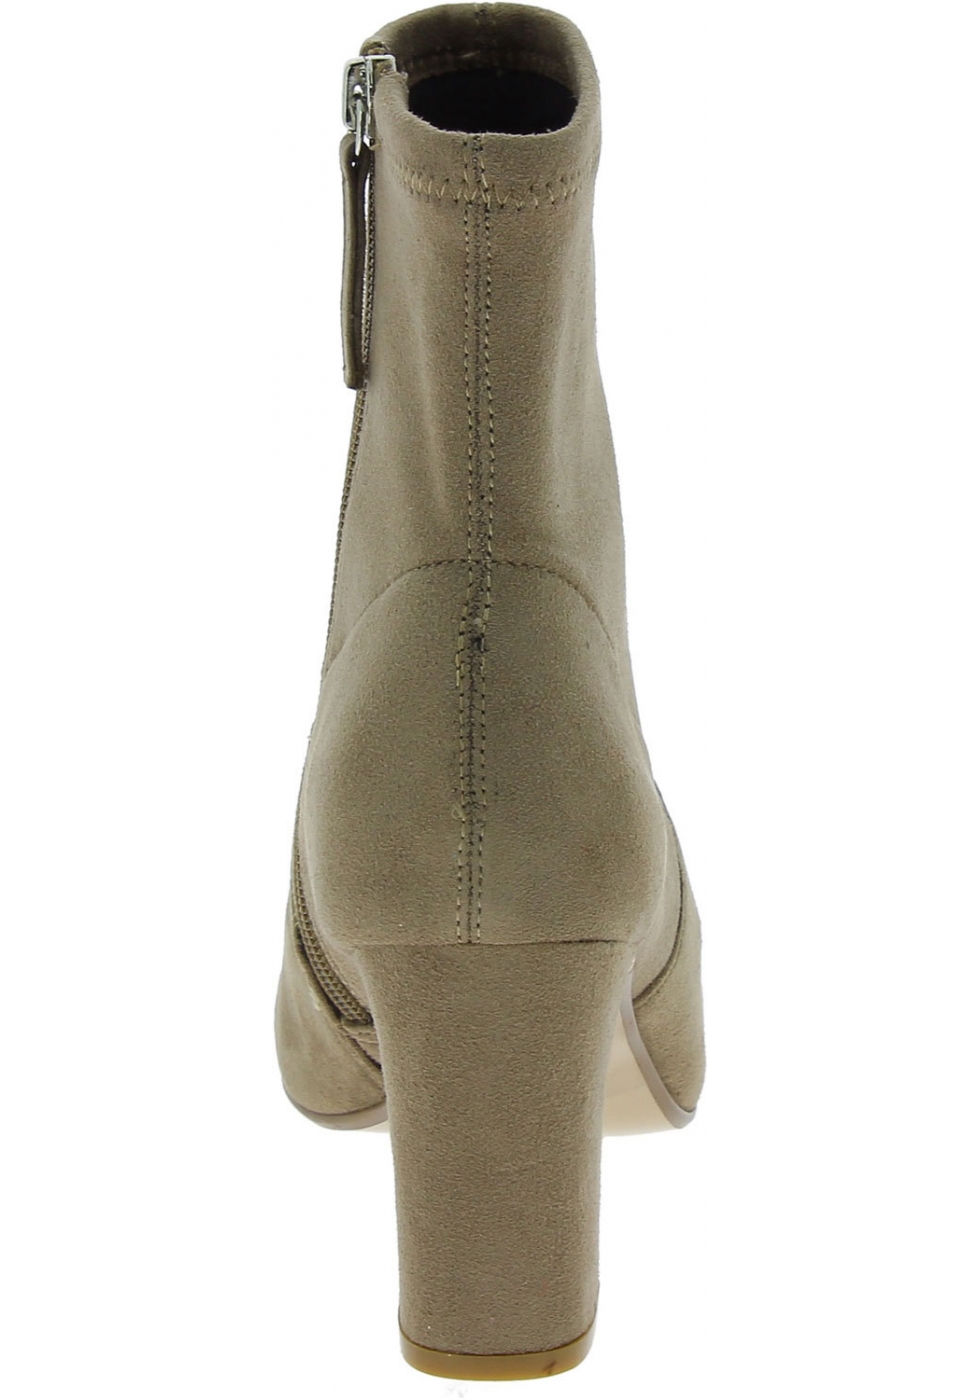 Steve Madden Women's block heels ankle boots in taupe suede effect